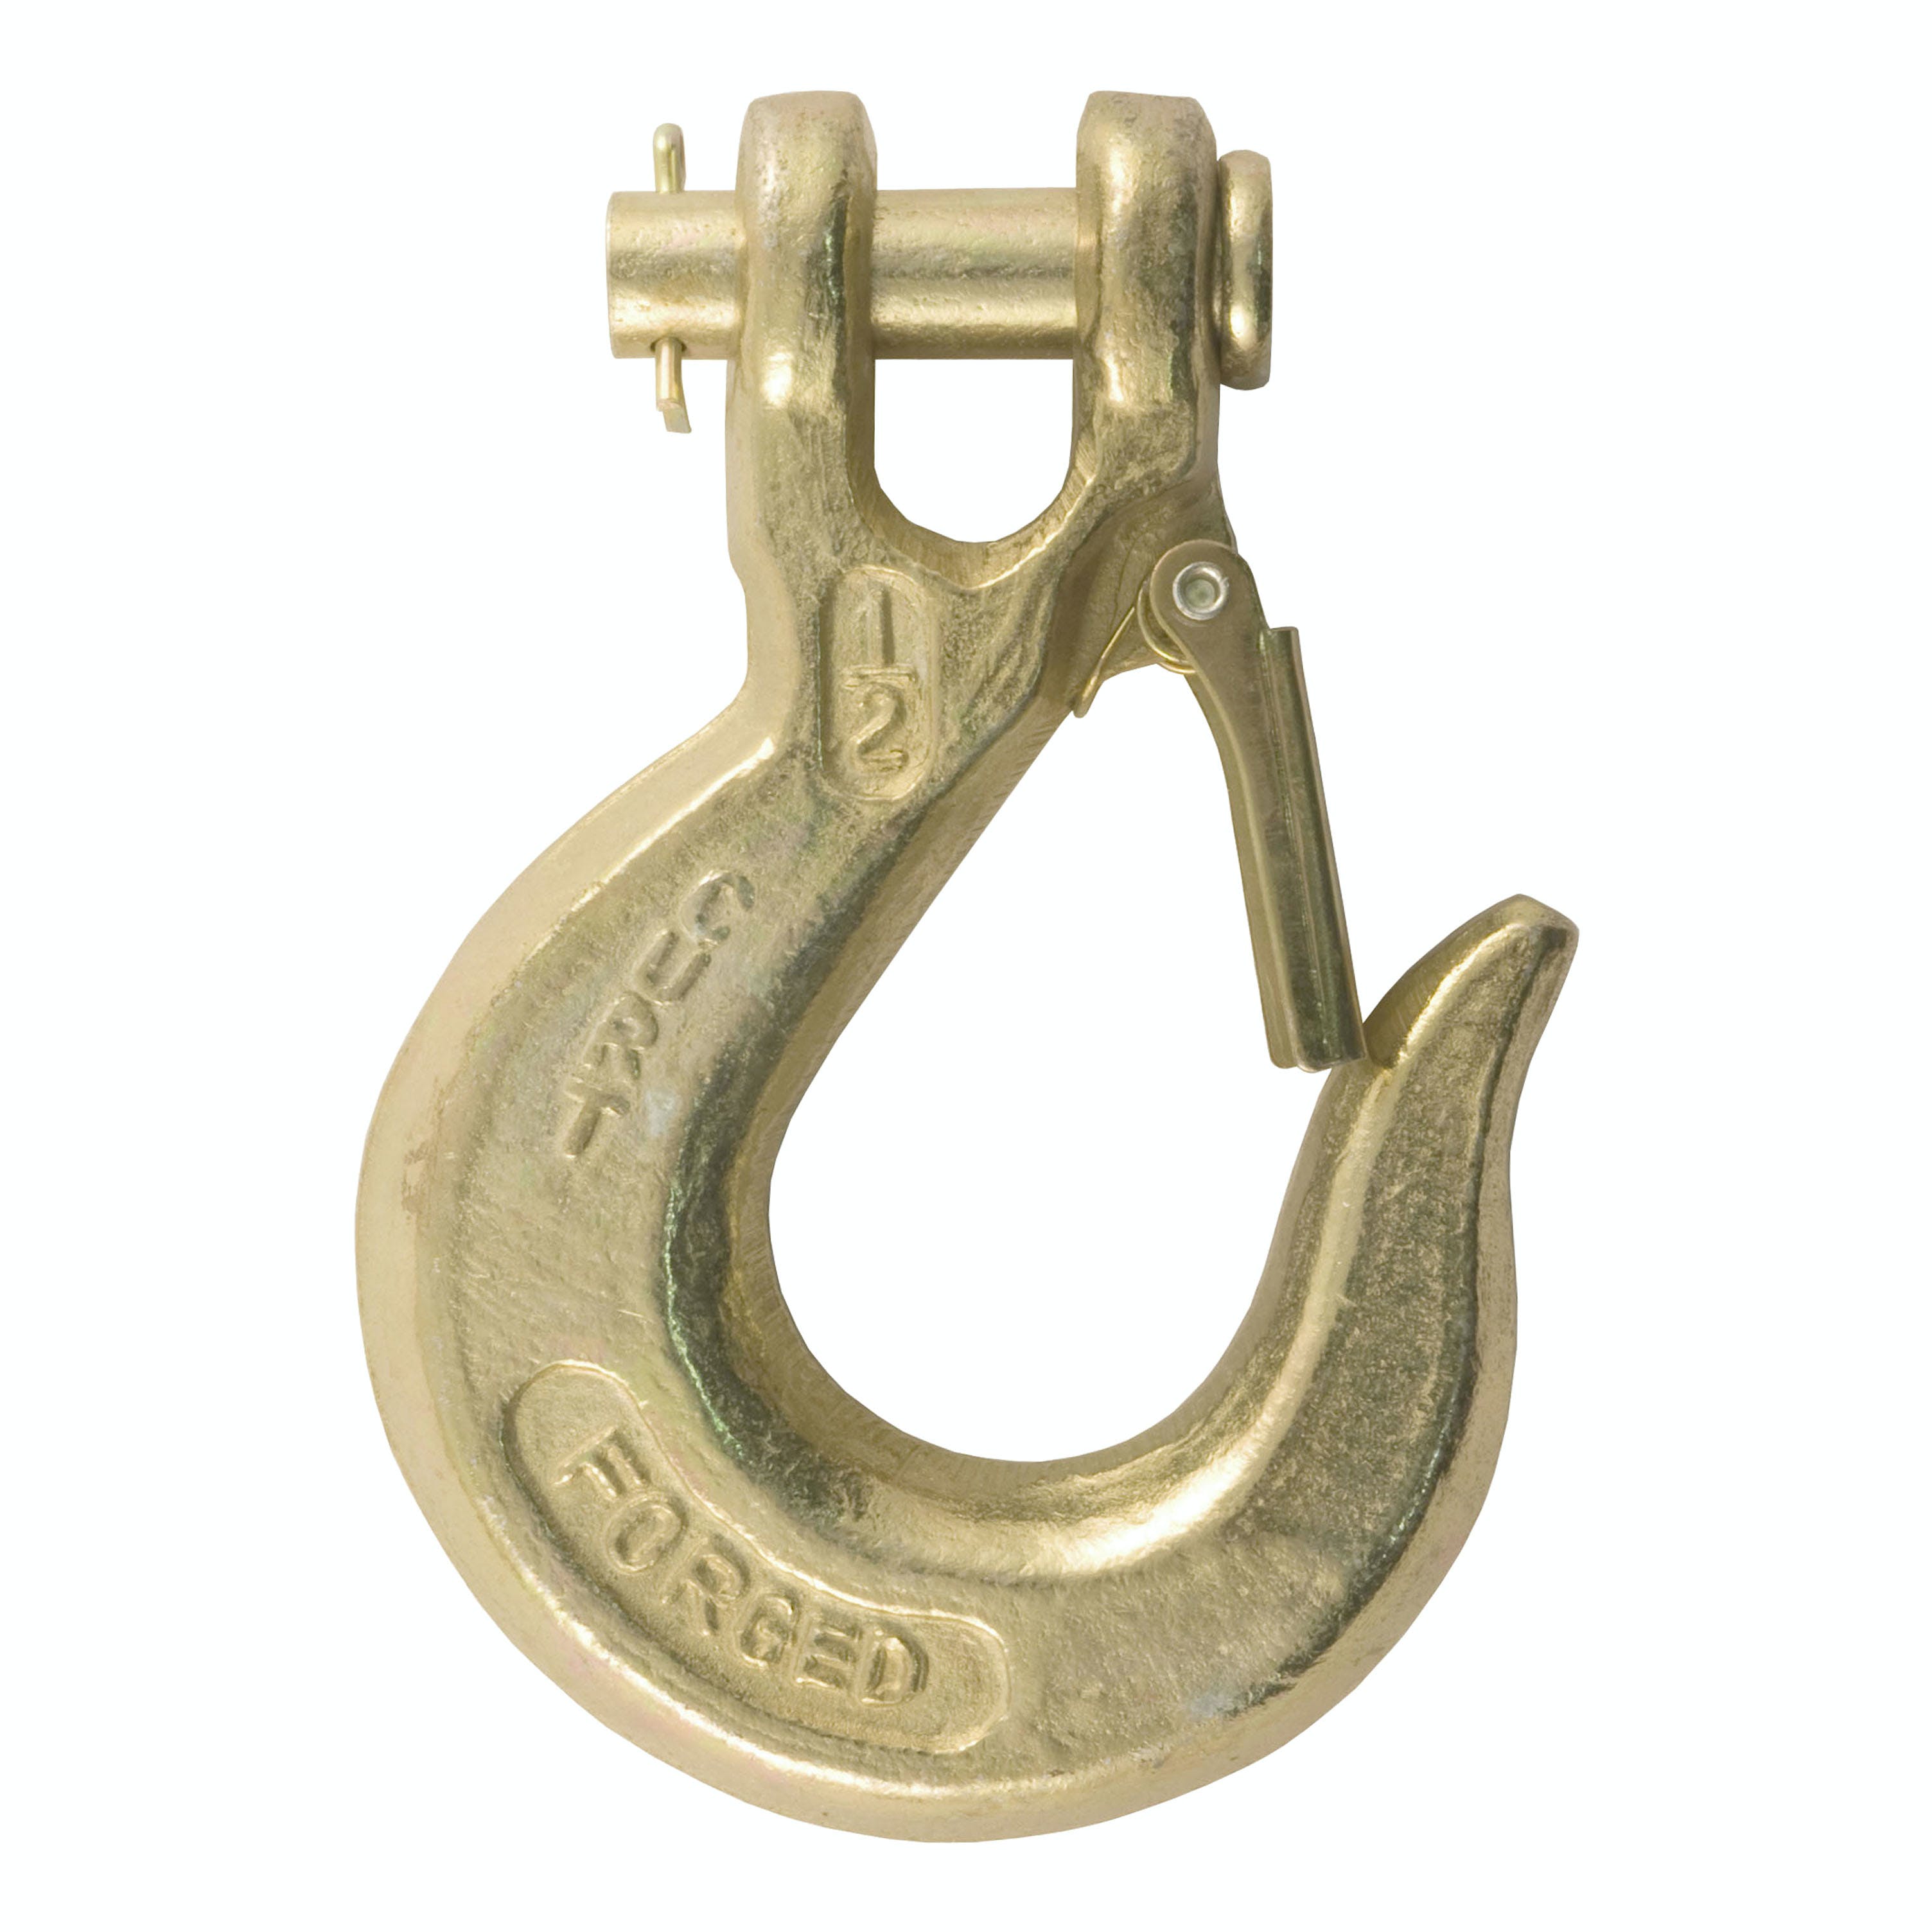 CURT 81910 1/2 Safety Latch Clevis Hook (35,000 lbs, 1/2 Pin)